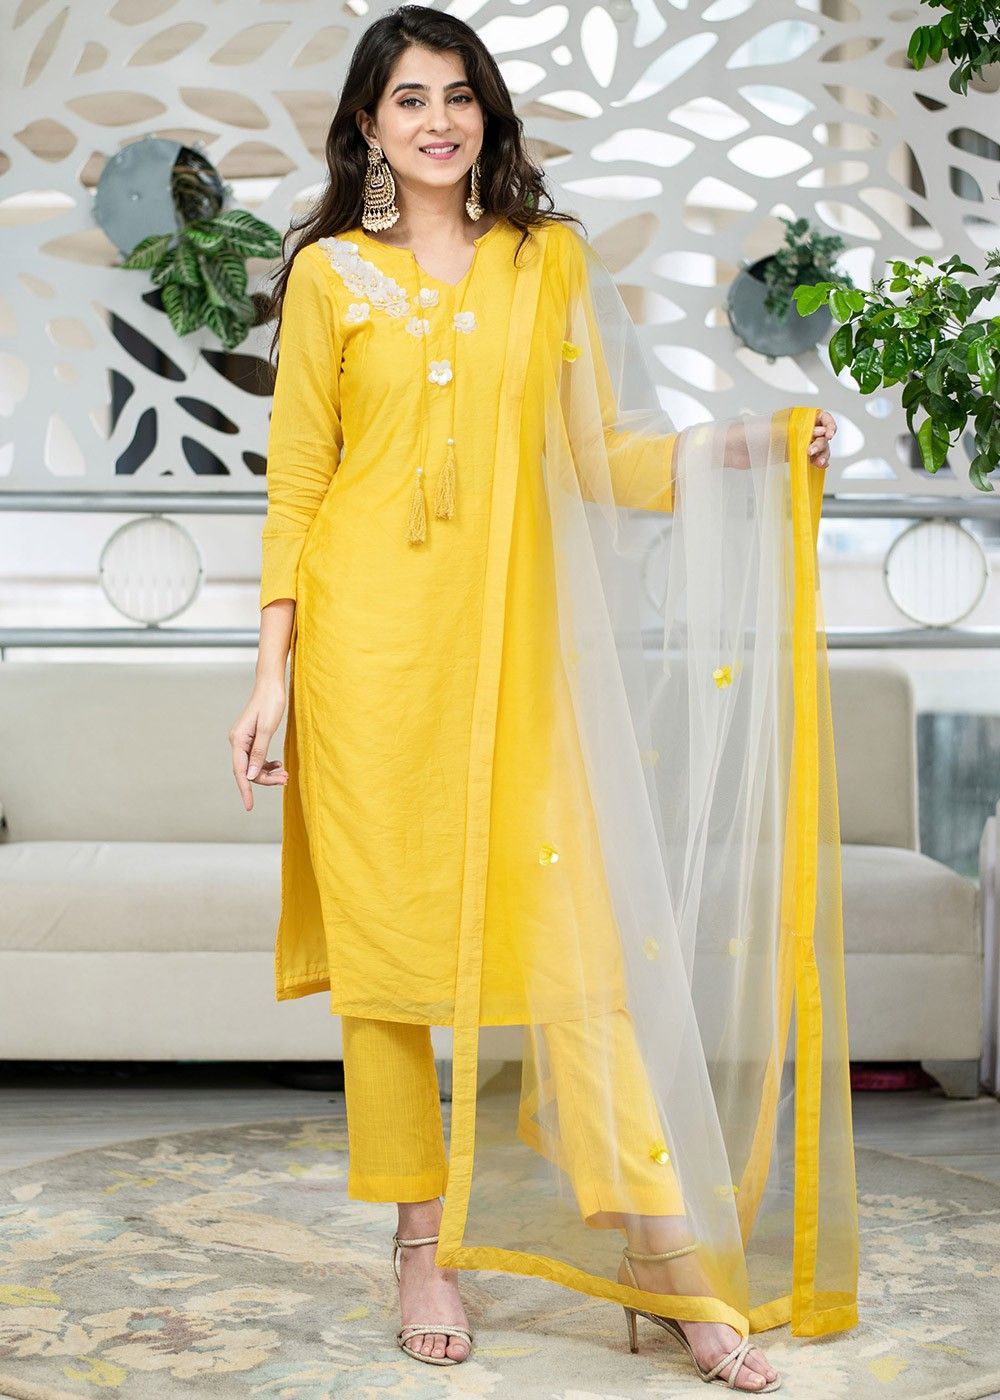 50 Latest Yellow Salwar Suit Designs for Weddings and Festivals (2022) -  Tips and Beauty | Simple indian suits, Suit designs, Punjabi outfits